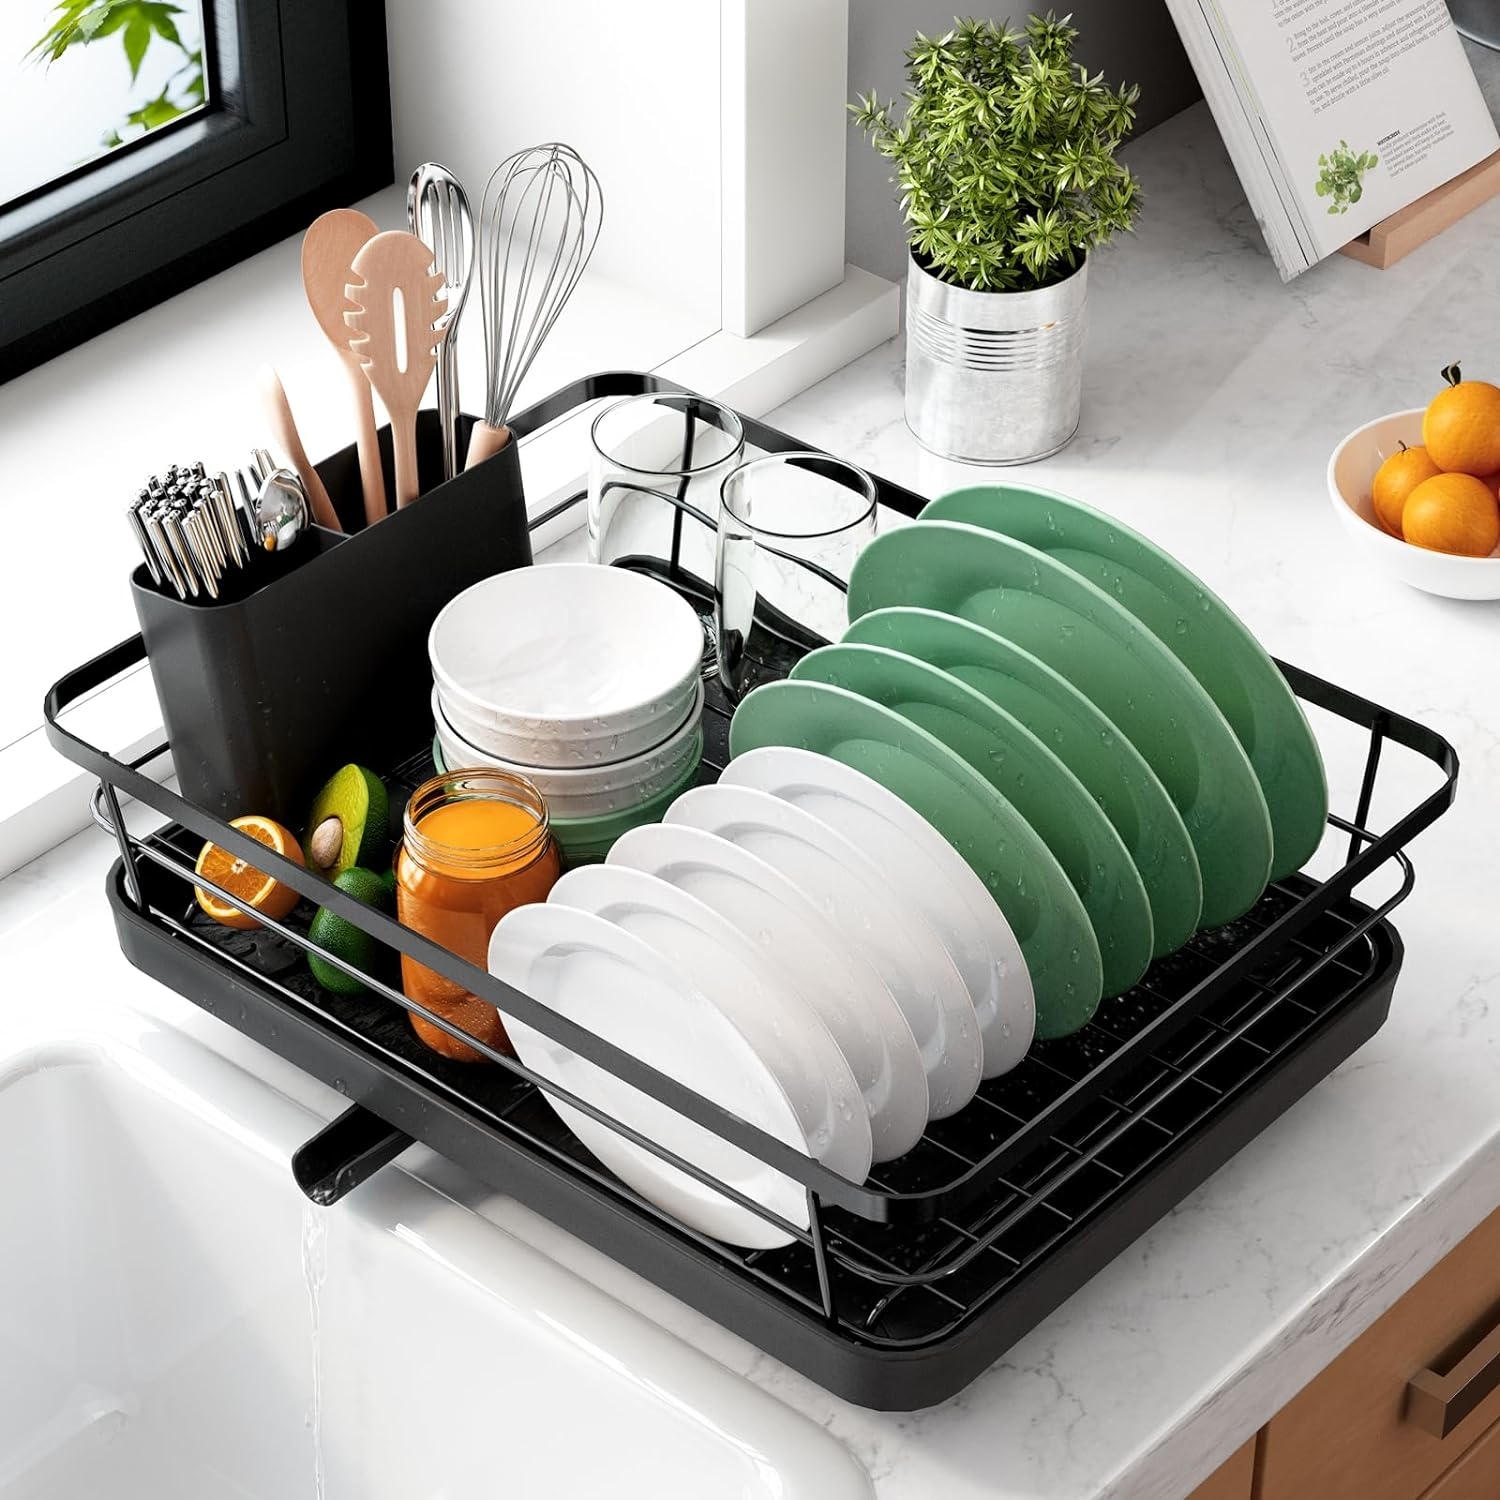 Compact dish rack on a kitchen counter holding clean dishes and utensils